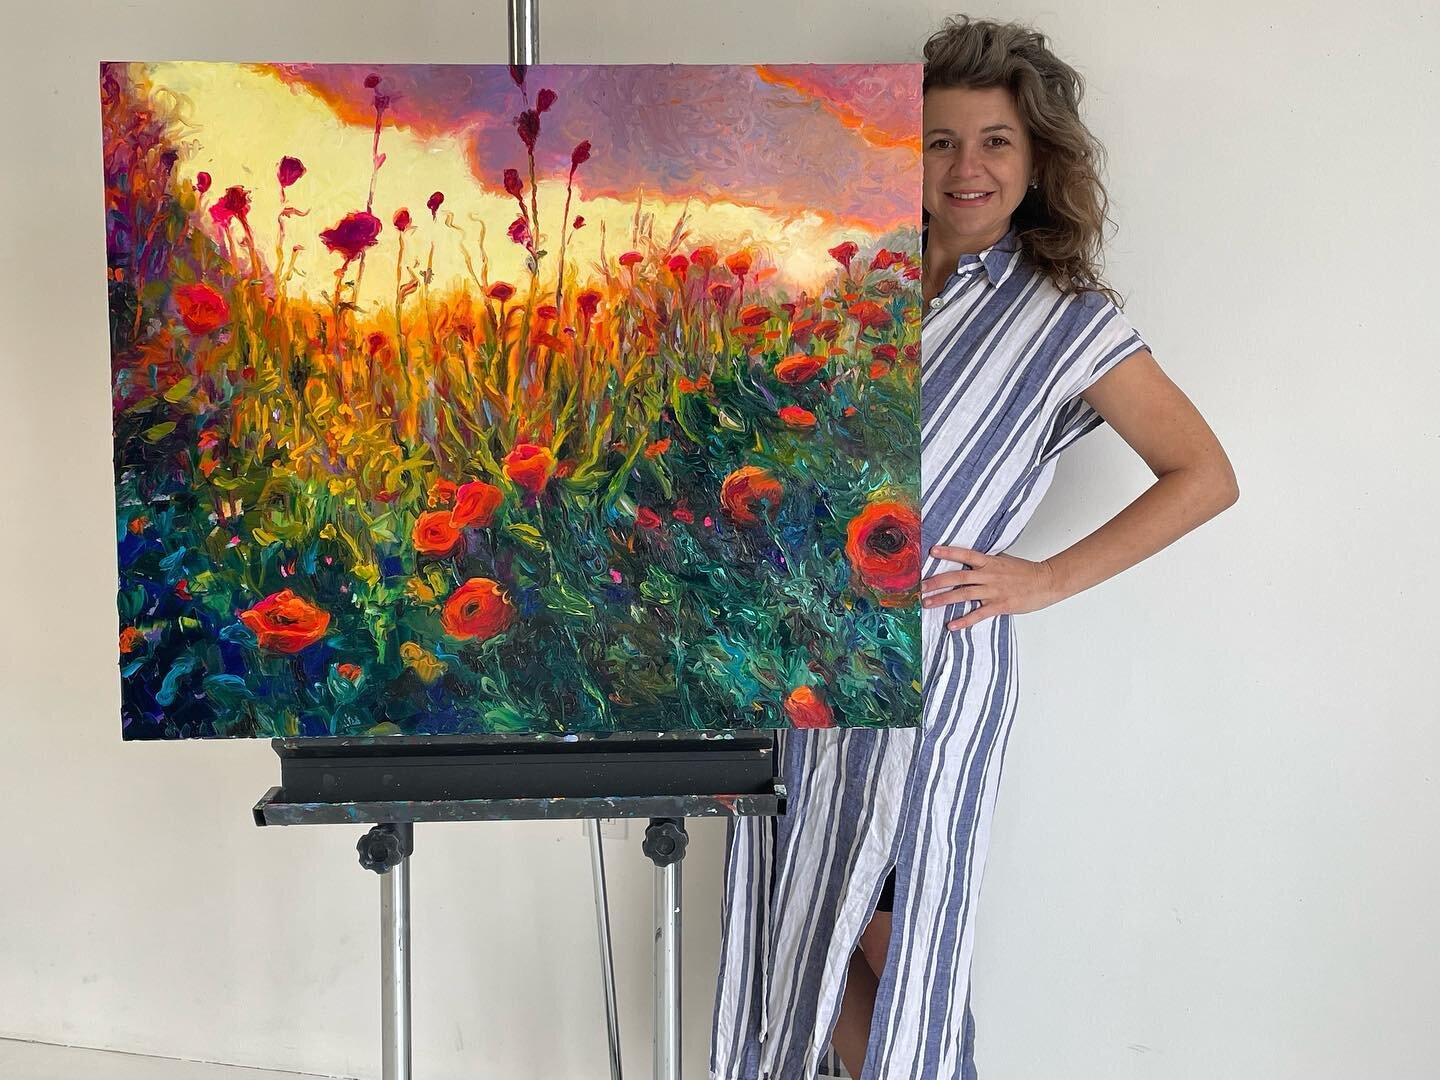 Standing with my newest painting: &ldquo;Papoula&rdquo;, meaning the common poppy. Oil on canvas fingerpainting. This original measures 36x30 inch and the original is sold. The painting was a commission, the client requested a &ldquo;floral painting 